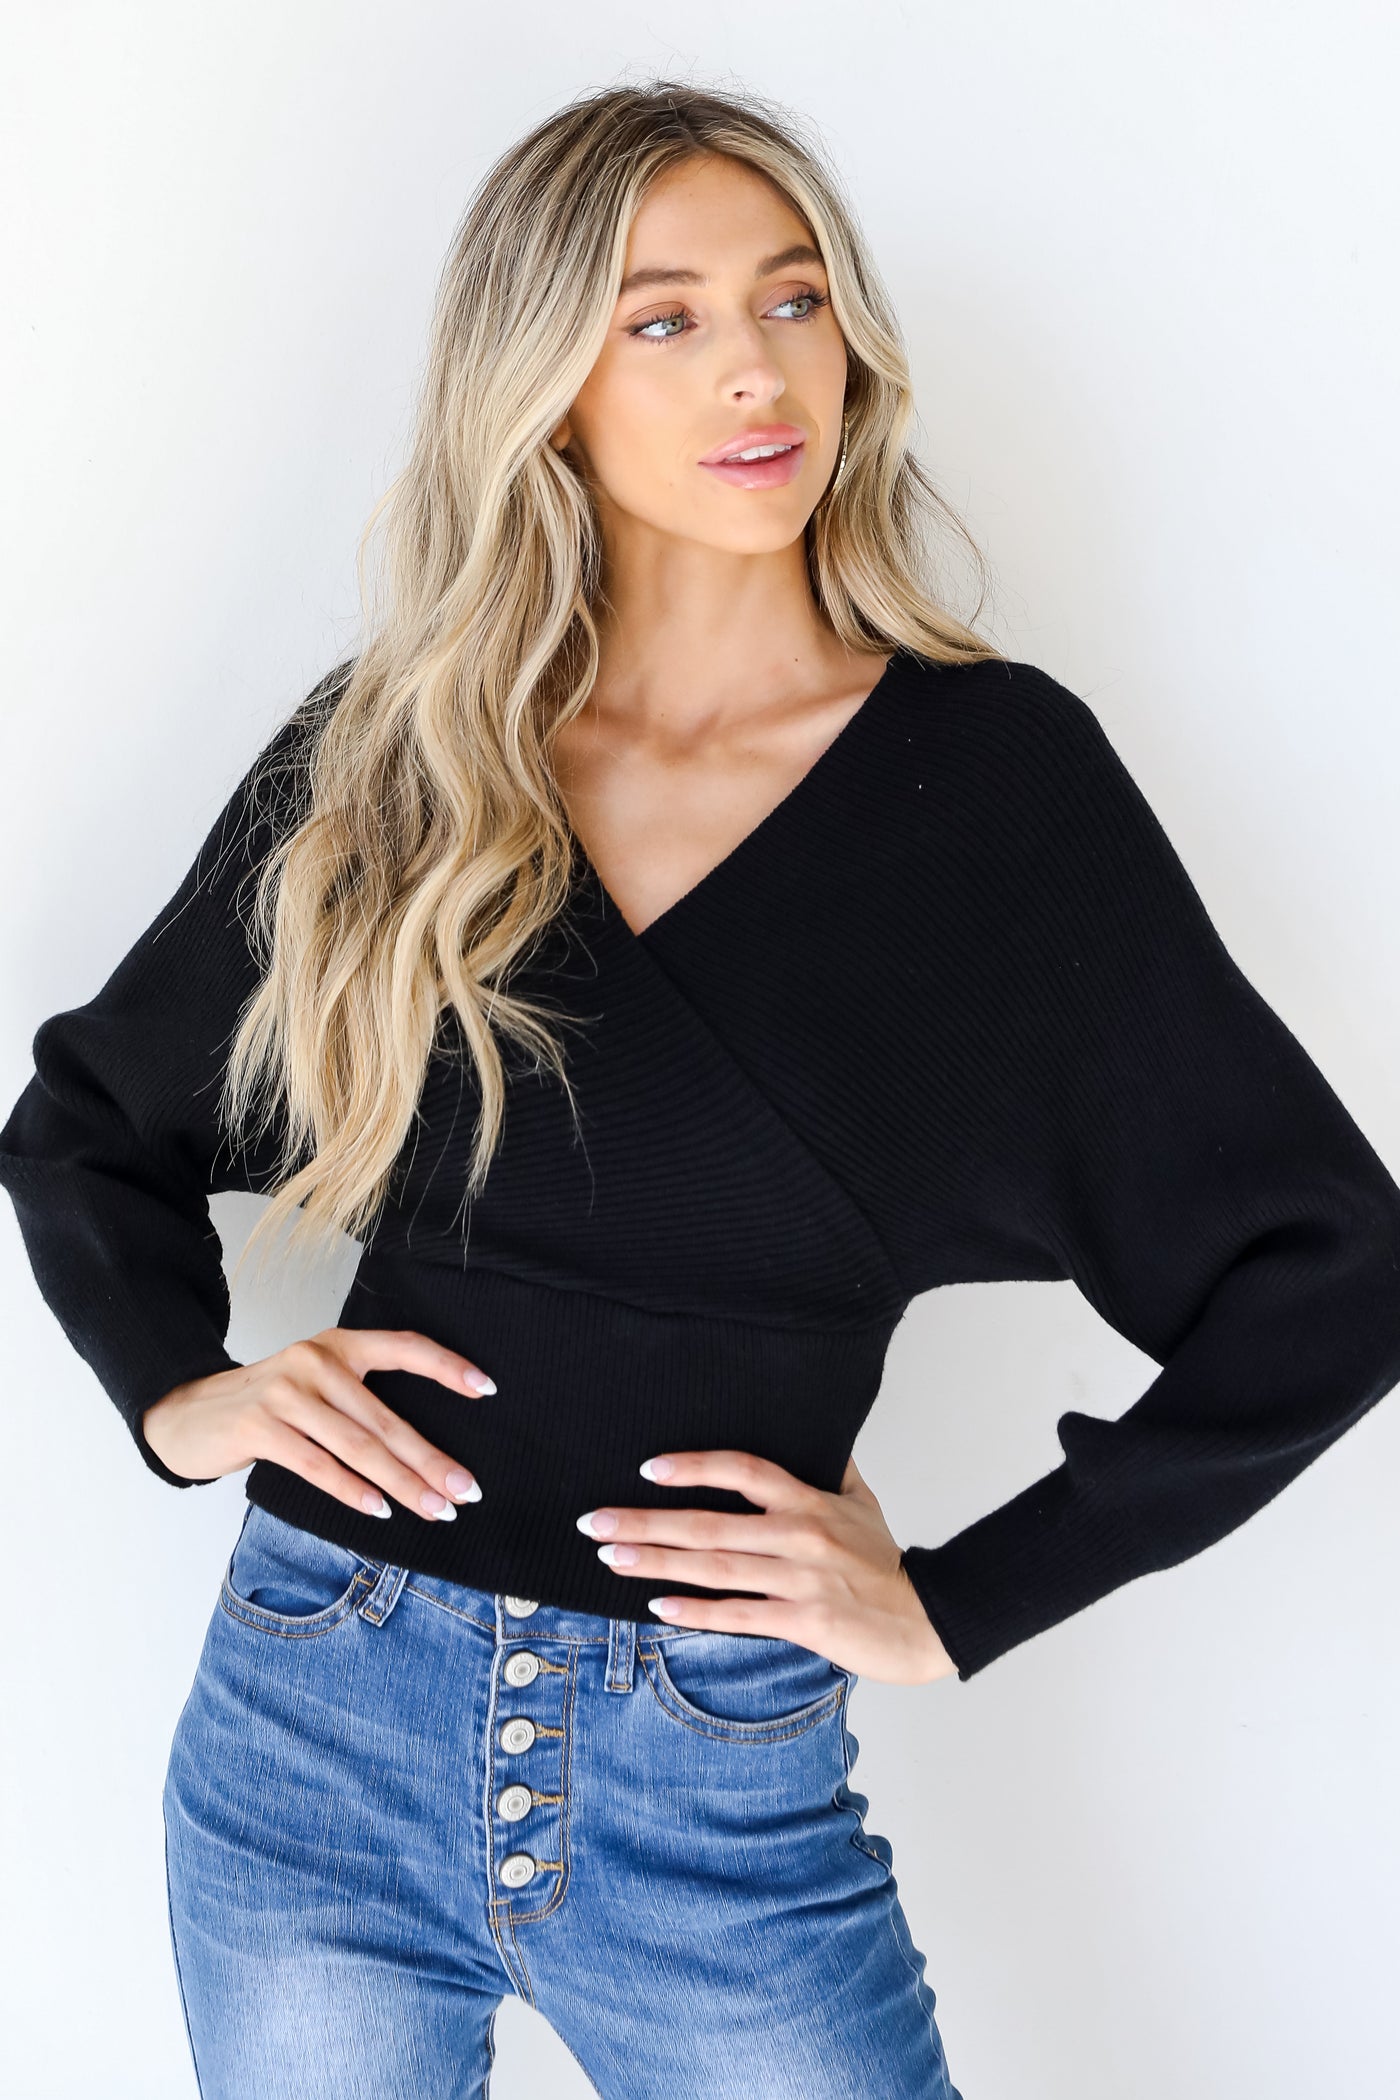 Surplice Sweater in black front view